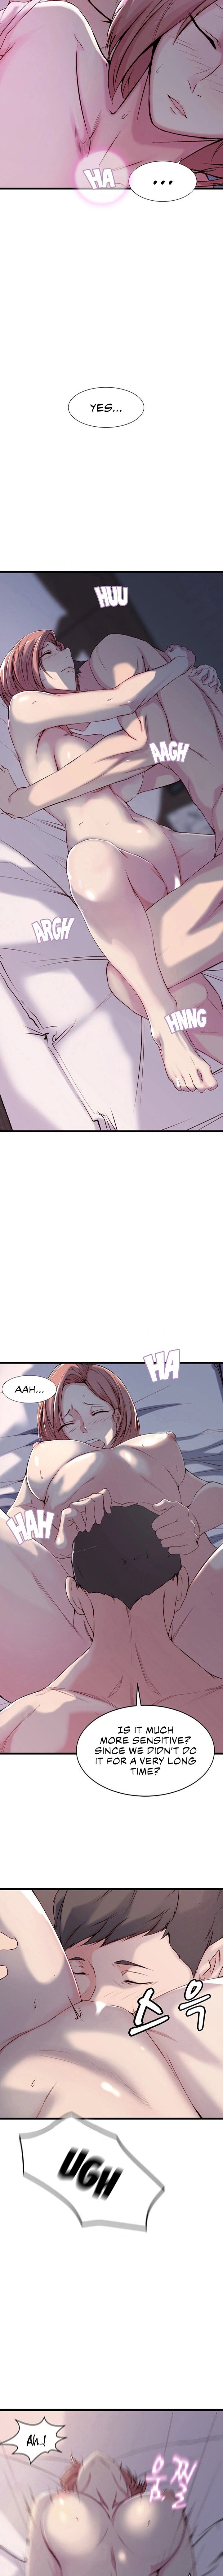 Sister-in-Law Manhwa - Chapter 1 Page 8